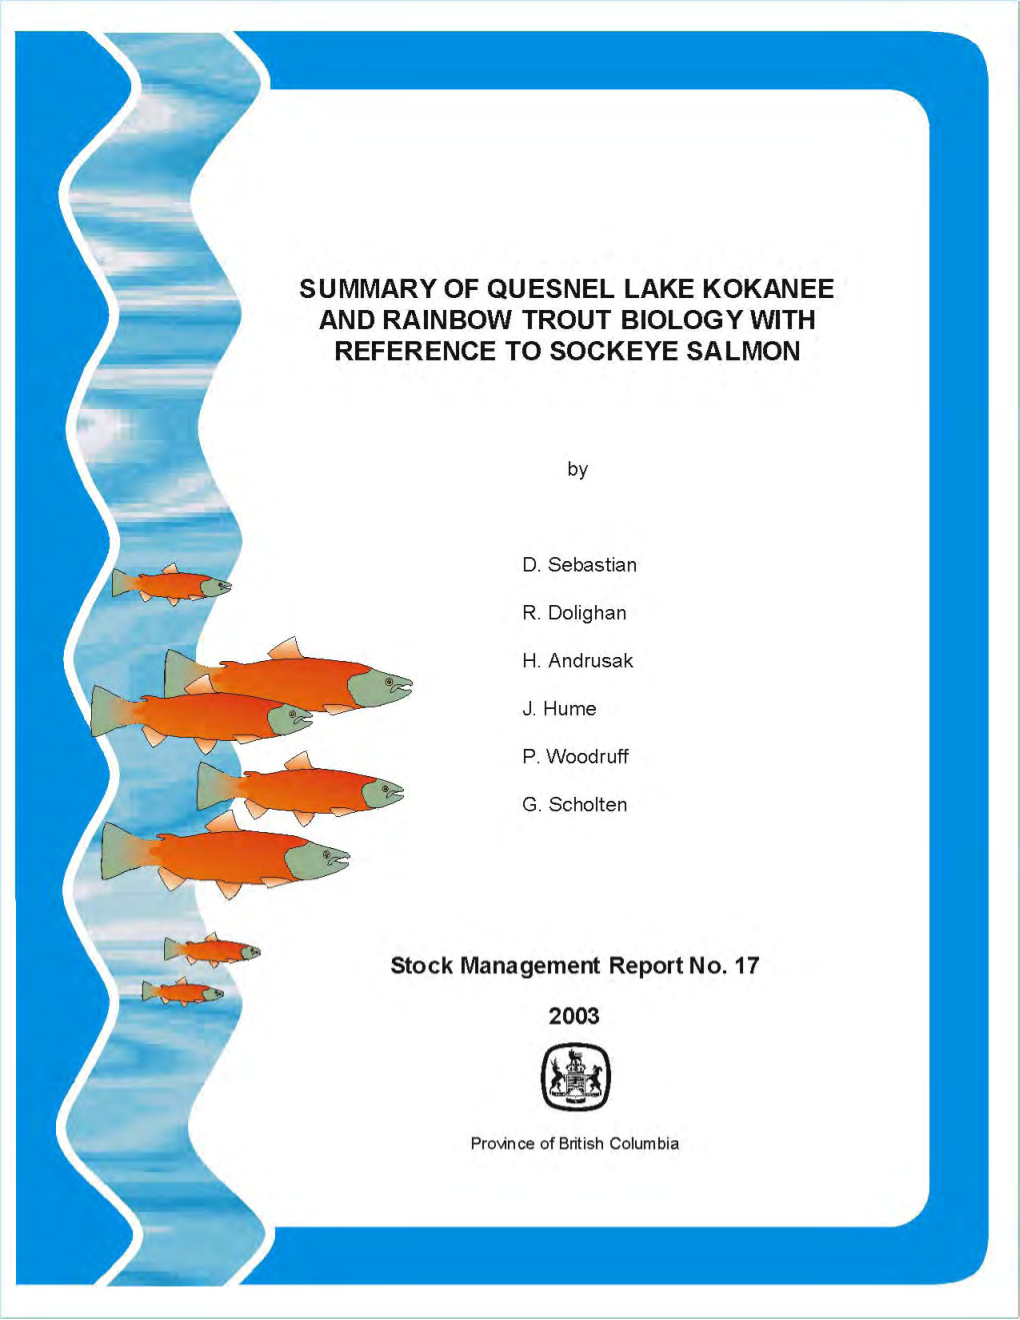 Summary of Quesnel Lake Kokanee and Rainbow Trout Biology with Reference to Sockeye Salmon